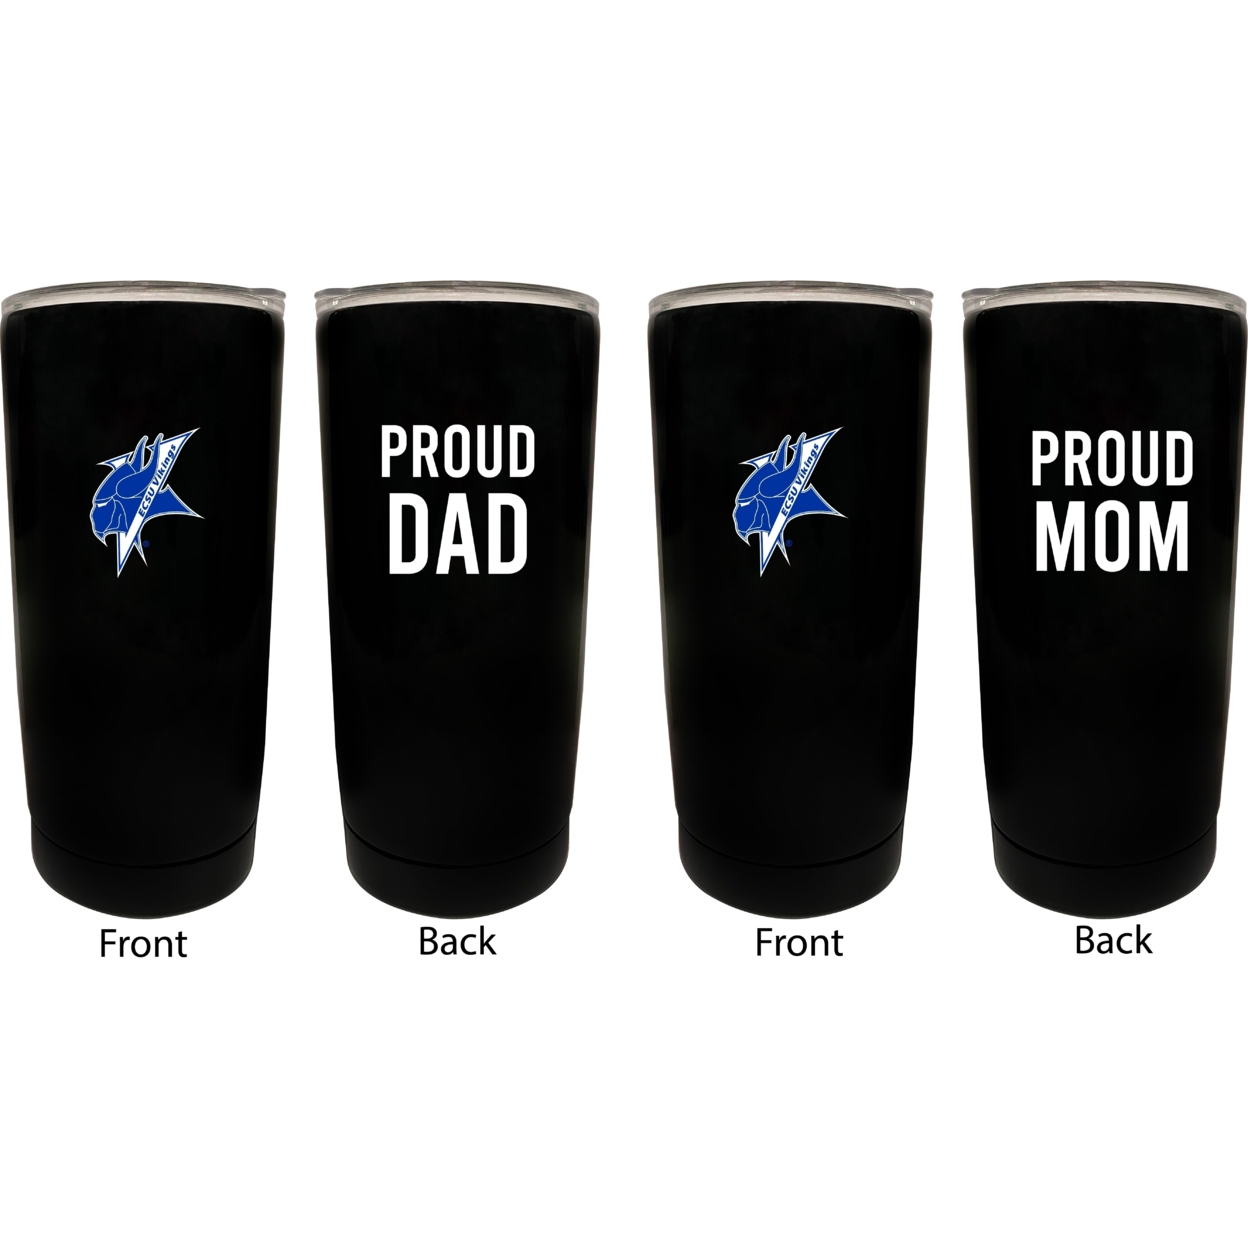 Elizabeth City State University Proud Mom And Dad 16 Oz Insulated Stainless Steel Tumblers 2 Pack Black.